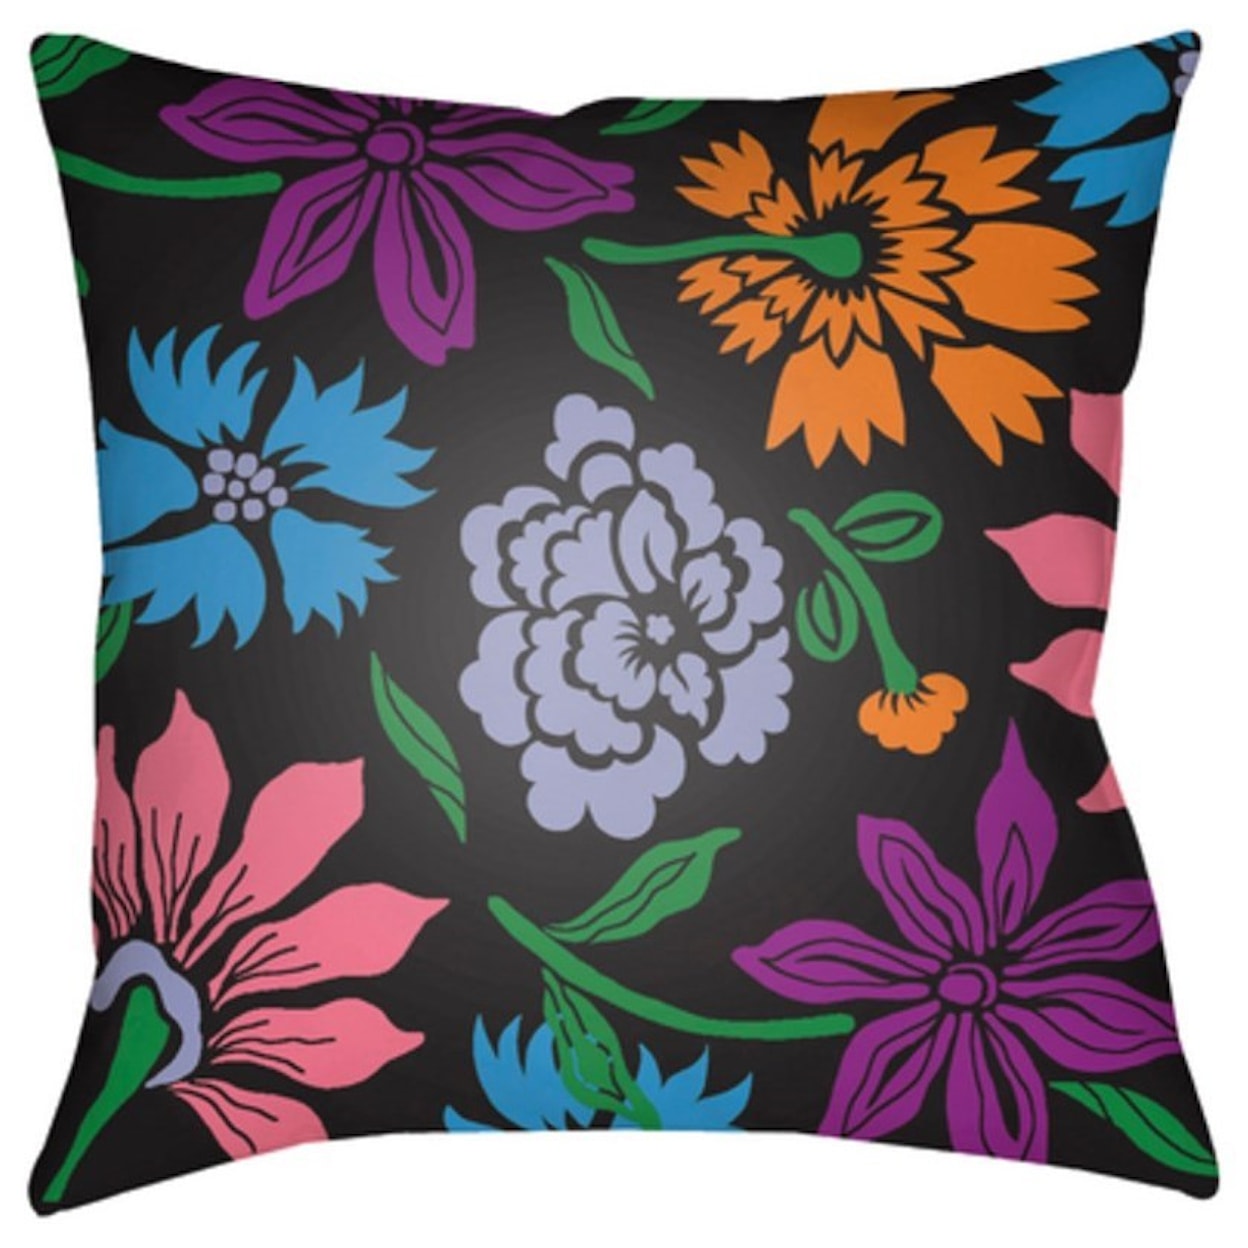 Surya Rugs Moody Floral Pillow